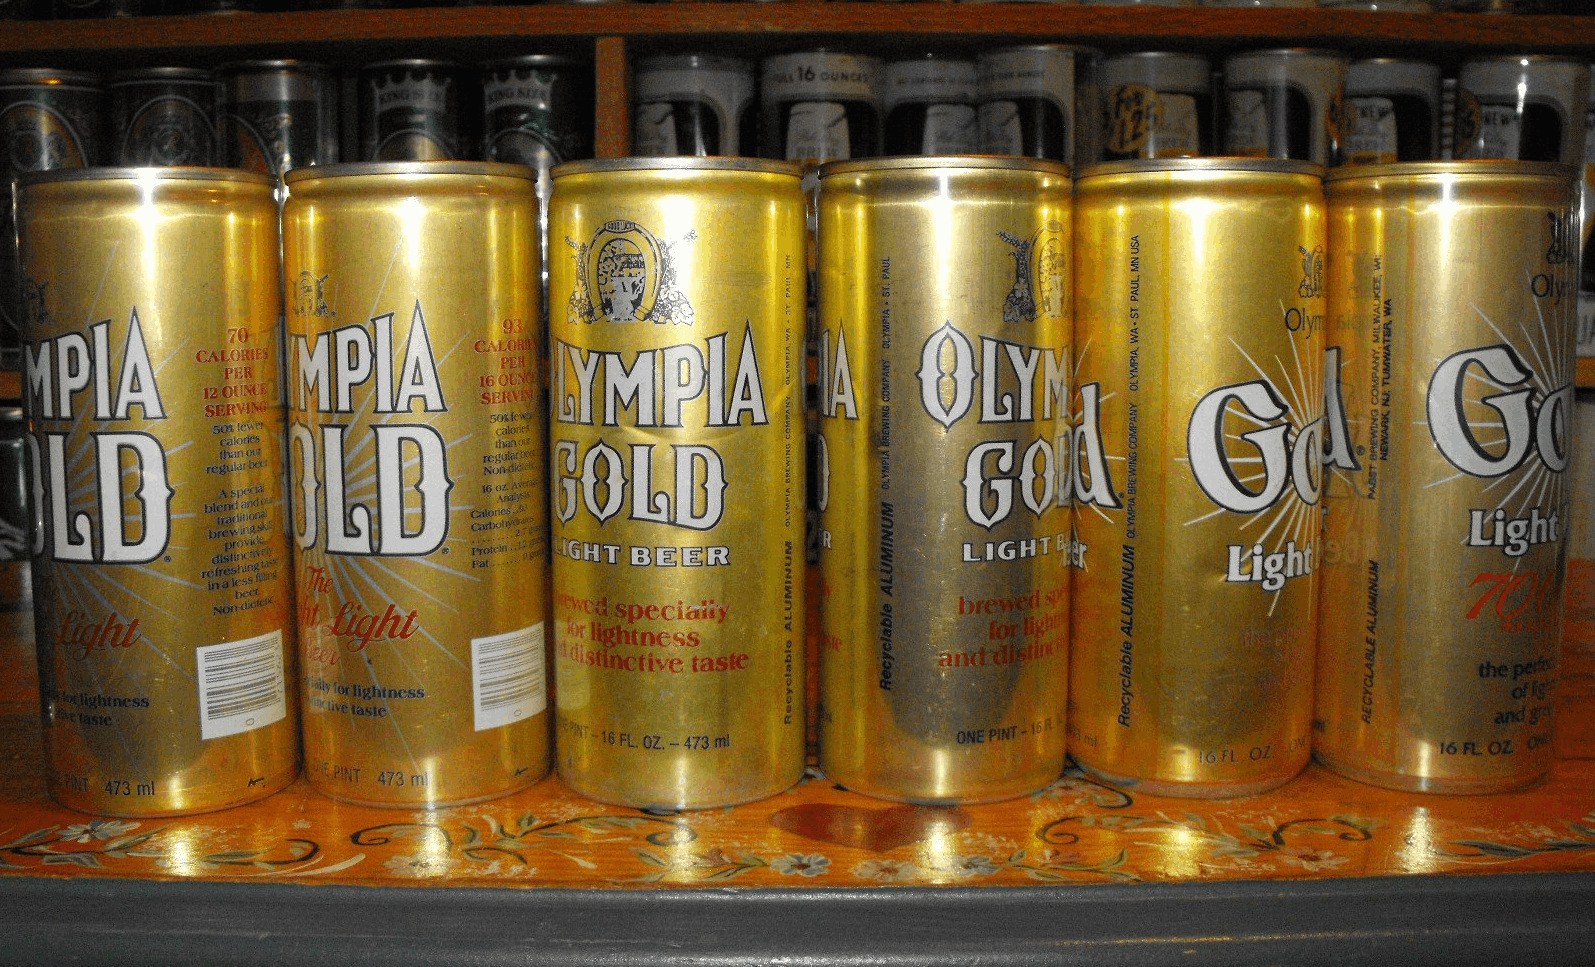 Olympia beer cans